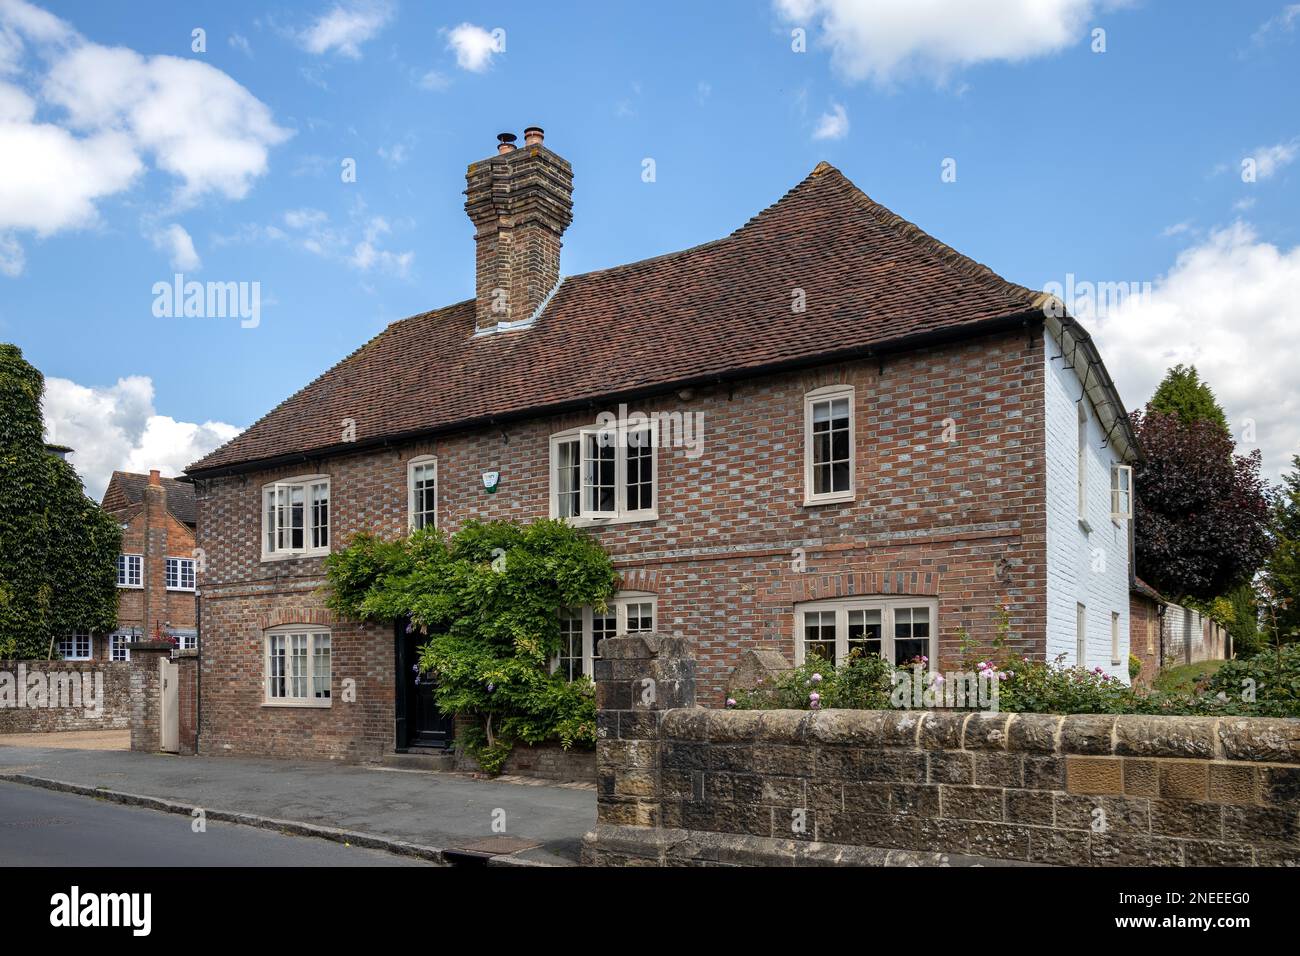 FLETCHING, EAST SUSSEX/UK - JULY 17 : View of Churchgate House a Grade II listed building in Fletching East Sussex on July 17, 2020 Stock Photo